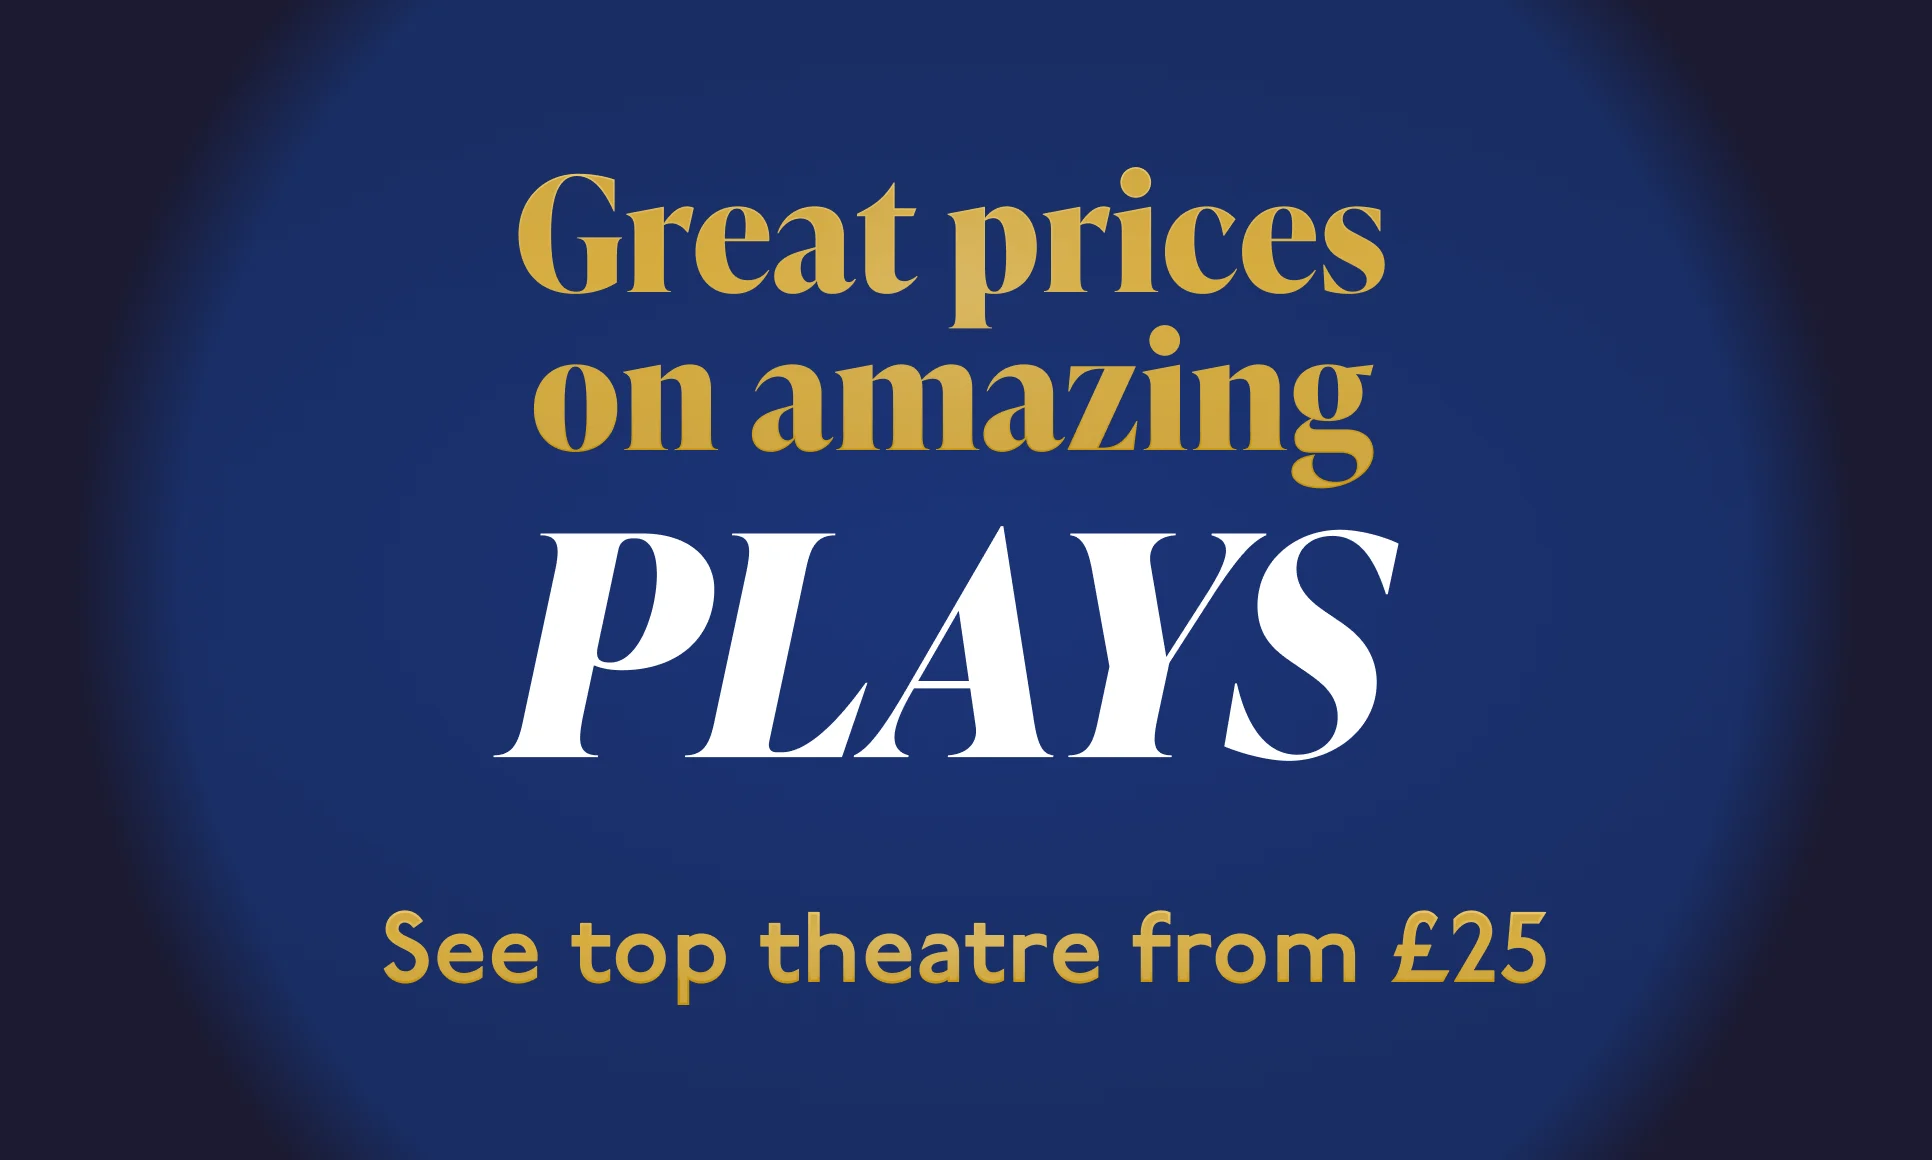 Great prices on amazing plays